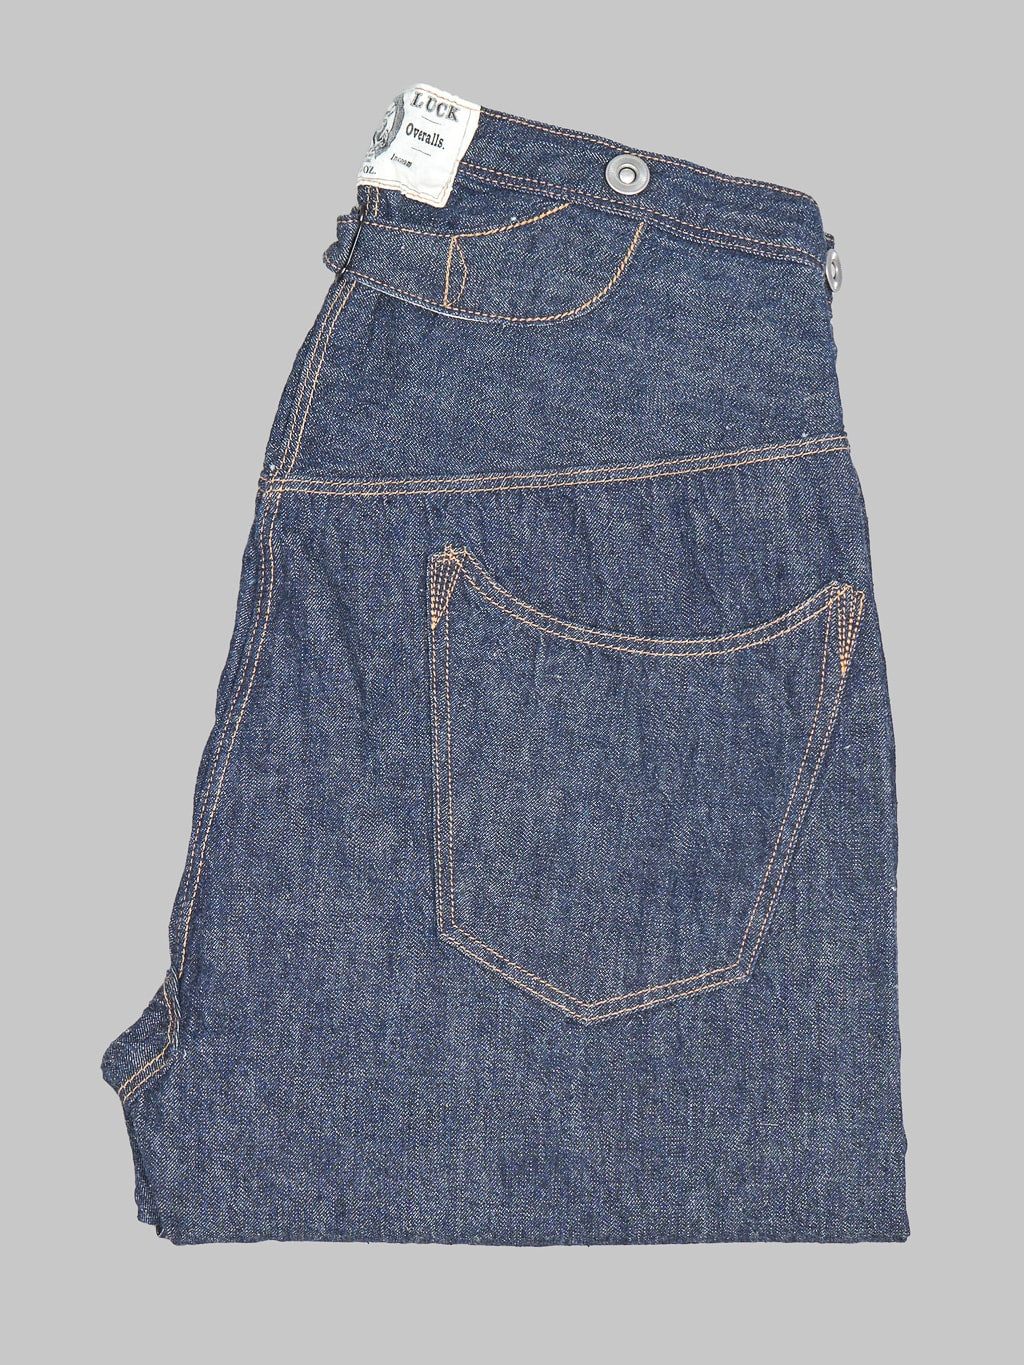 TCB Good Luck Wide Straight Jeans made in okayama